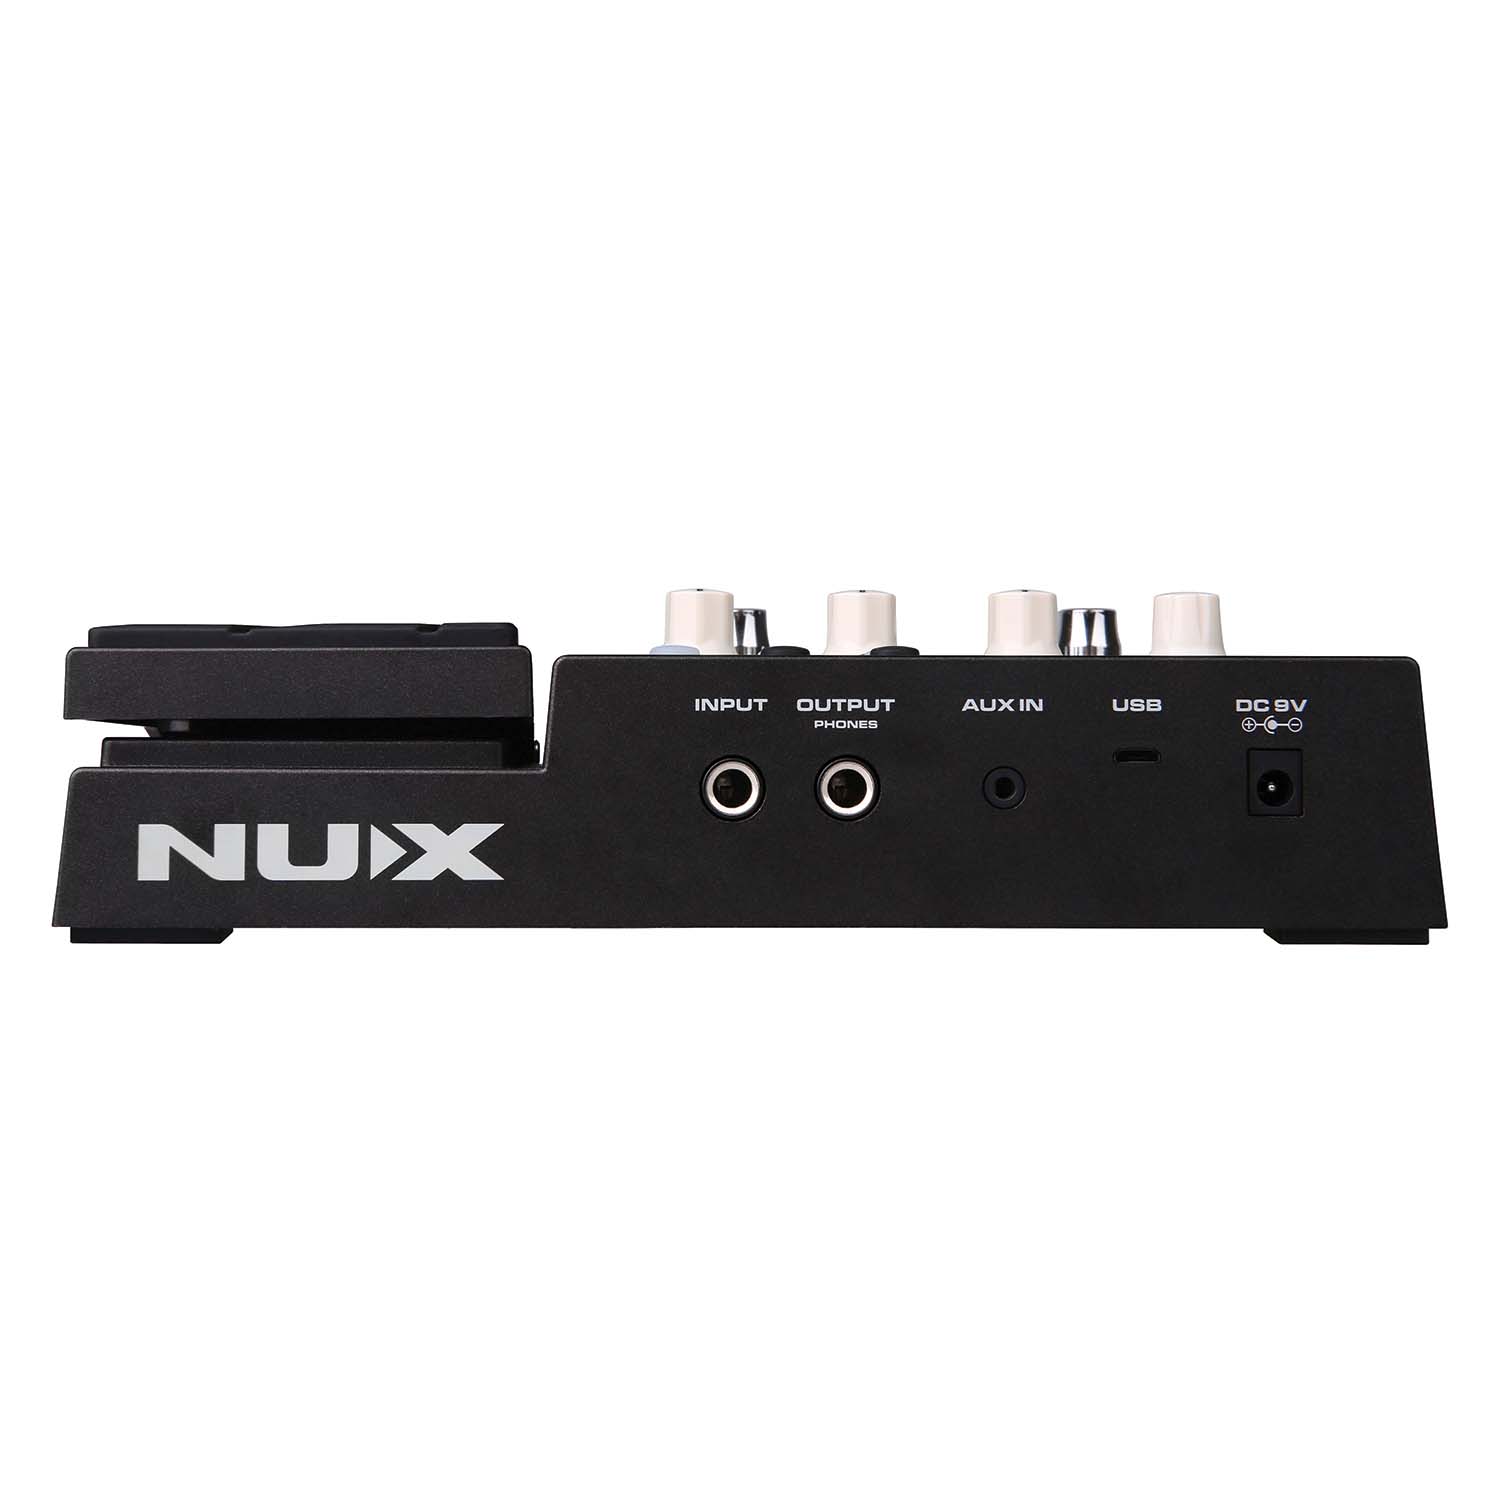 Nux MG300 online price in India